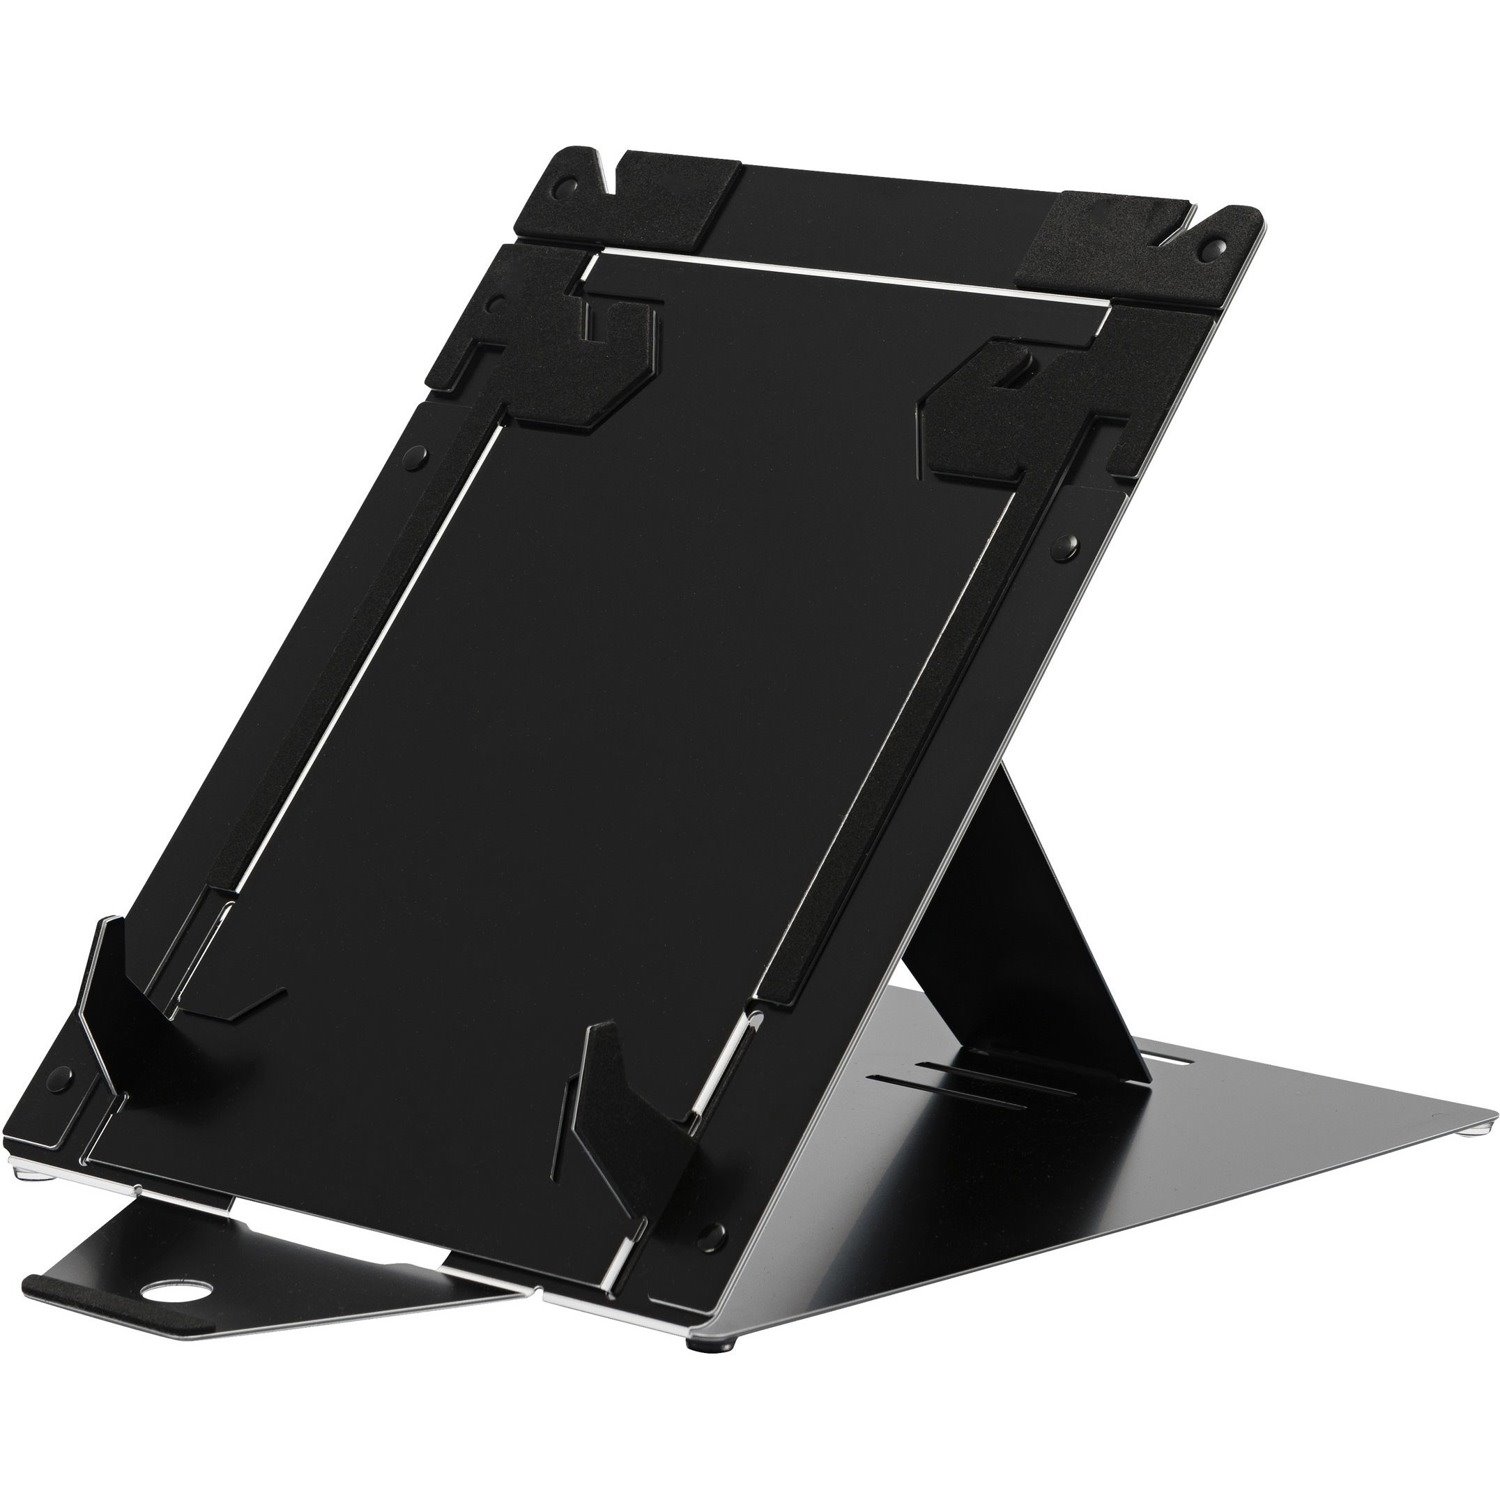 R-Go tablet and laptop stand